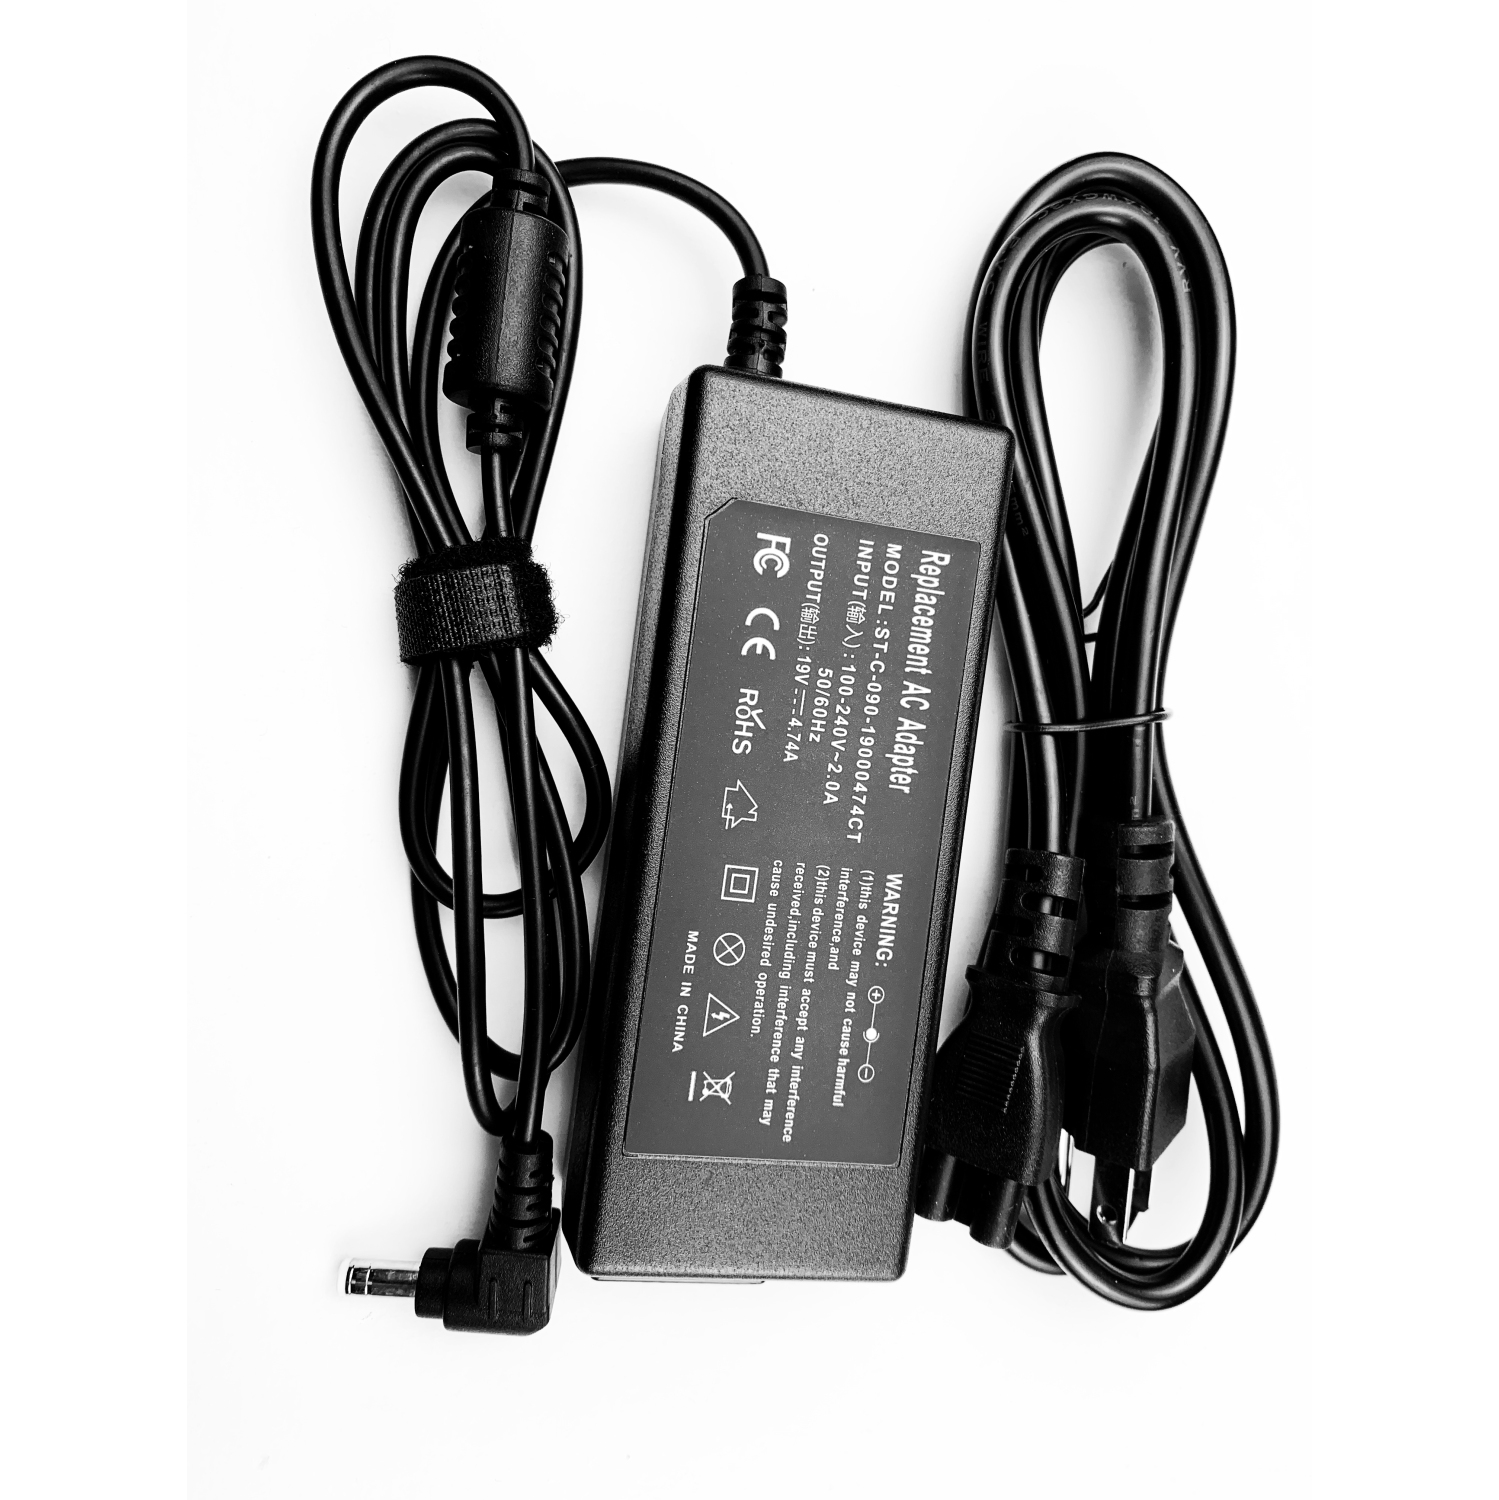 90W AC adapter power cord charger for Toshiba Satellite Pro P300-1FE U400-142 S850 S850D